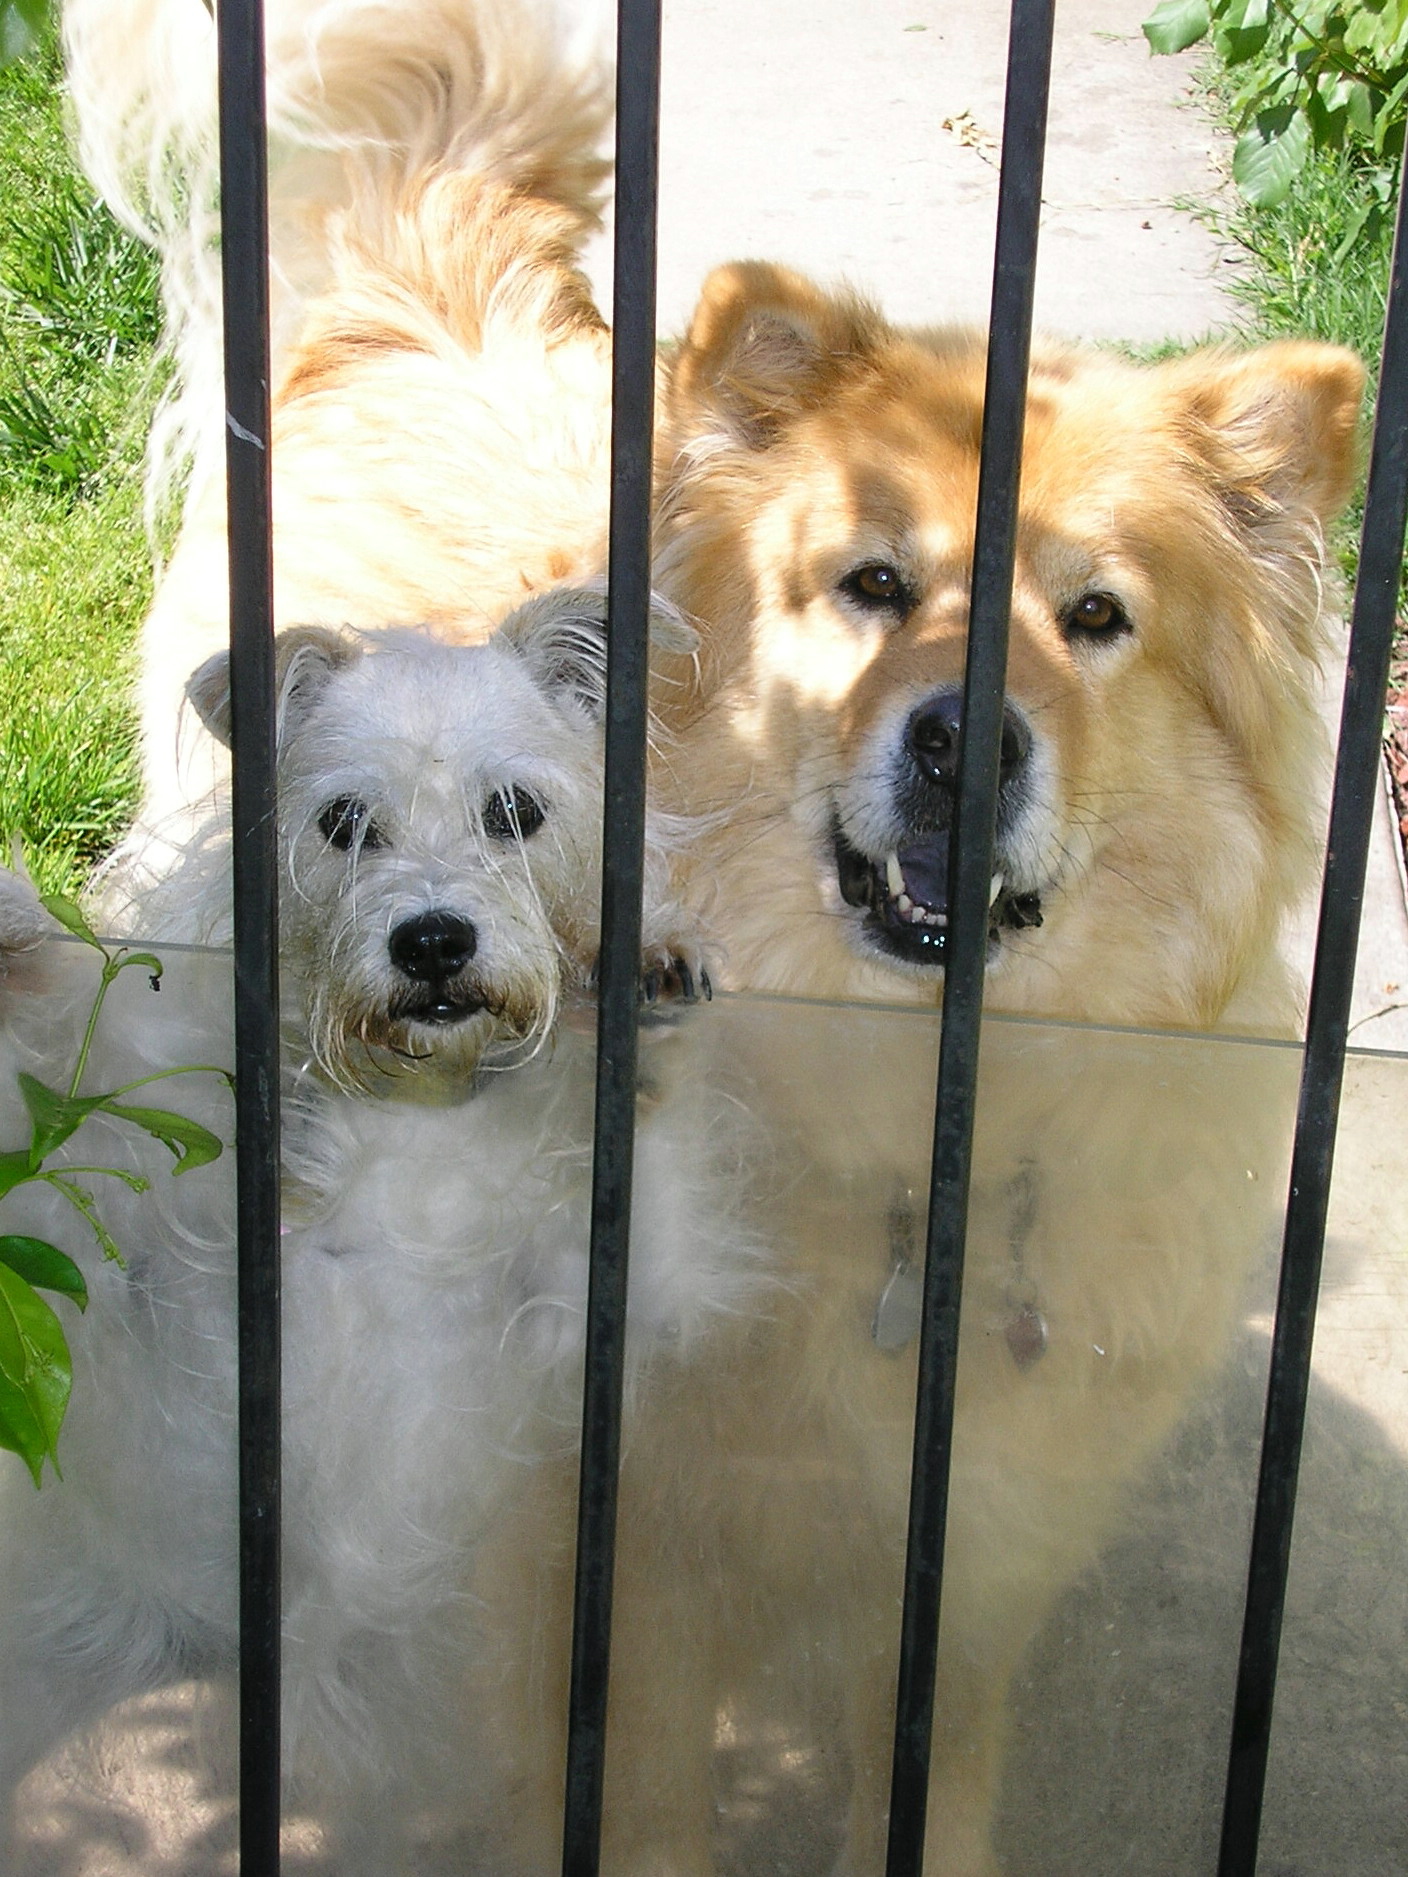 Let Us Out, Animals, Bars, Bspo06, Dogs, HQ Photo